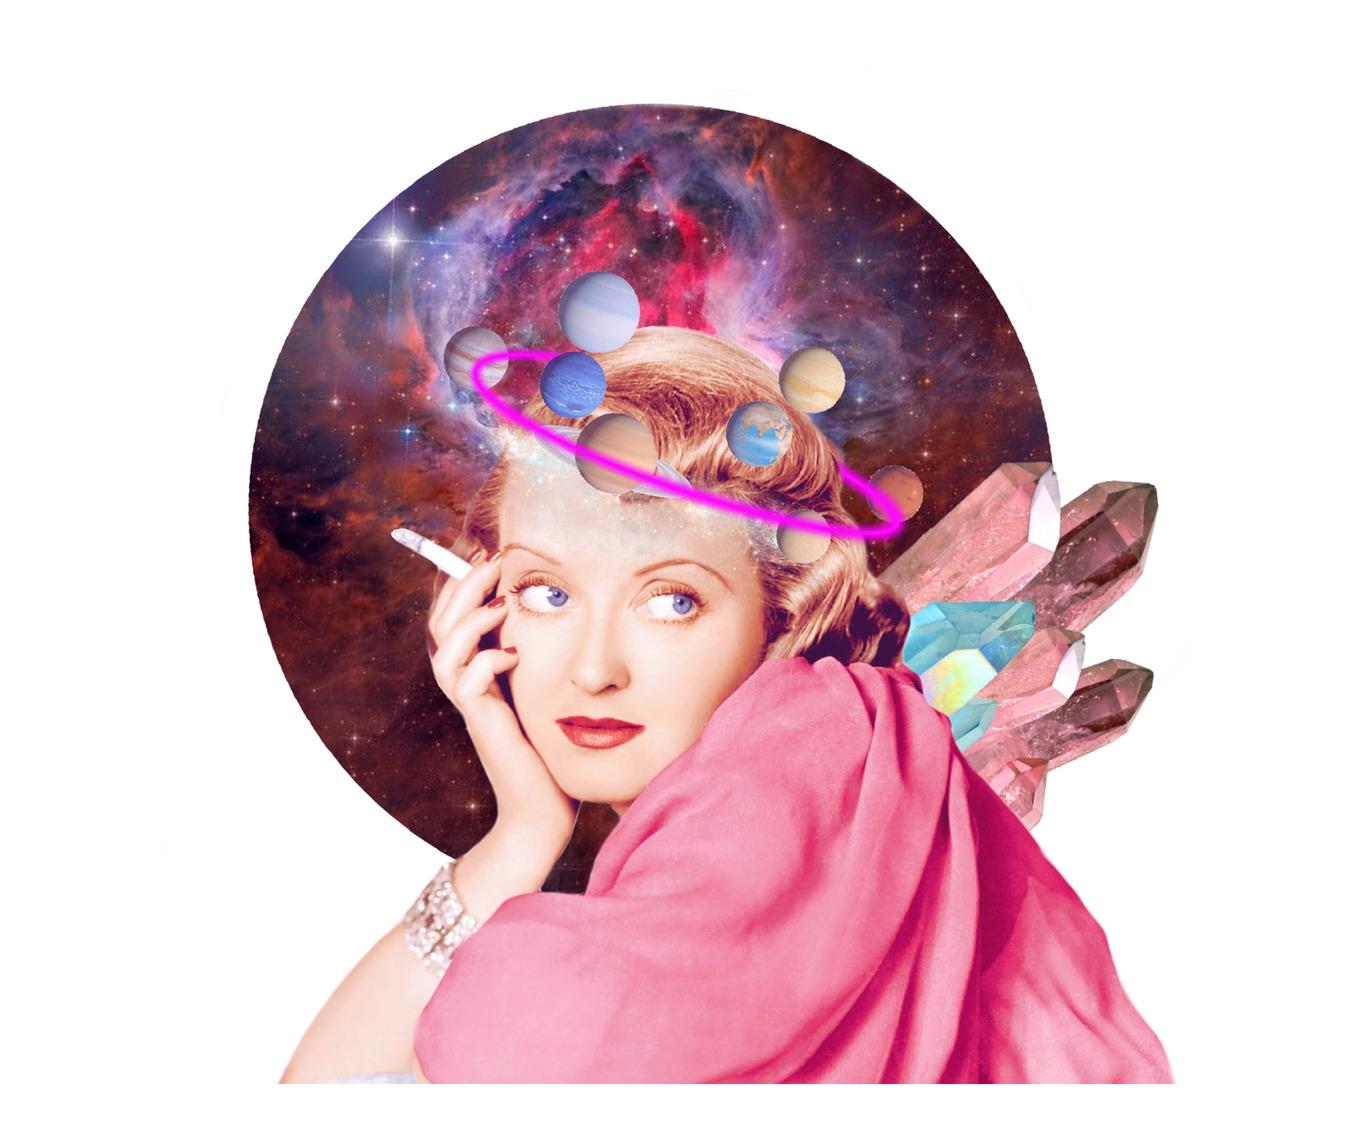 Bette, Out of This World - Contemporary Mixed Media Art by Unknown